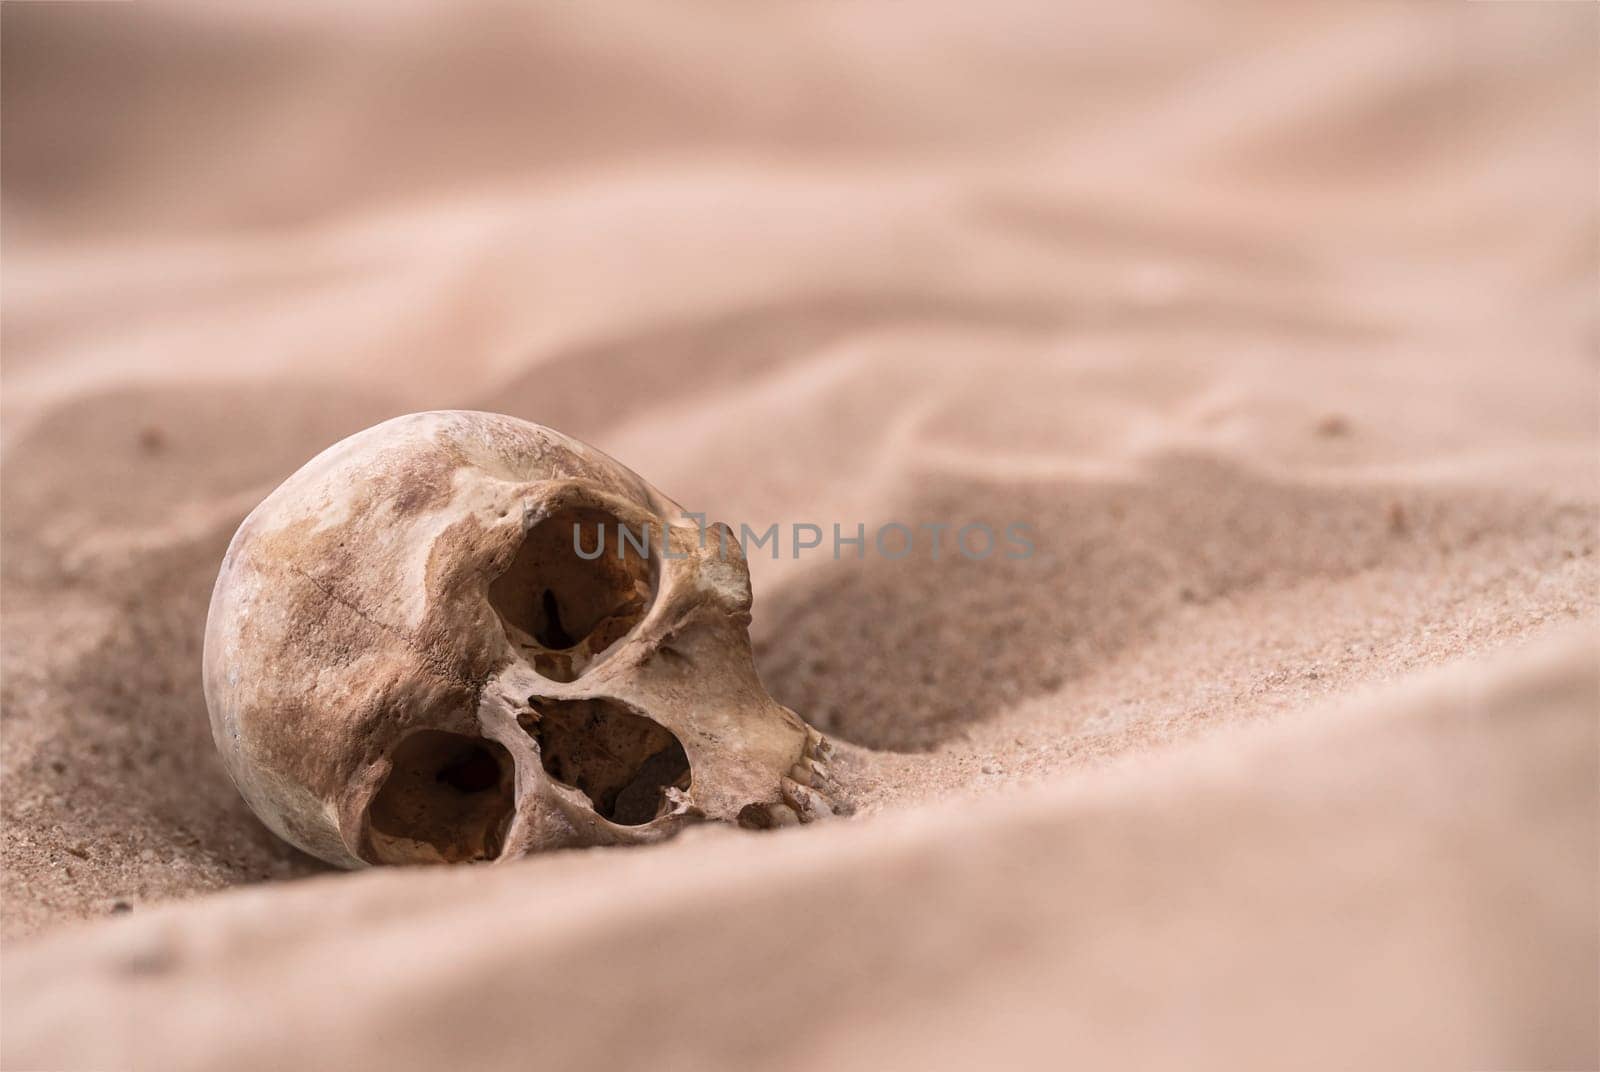 Human Skull In The Sand by mrdoomits